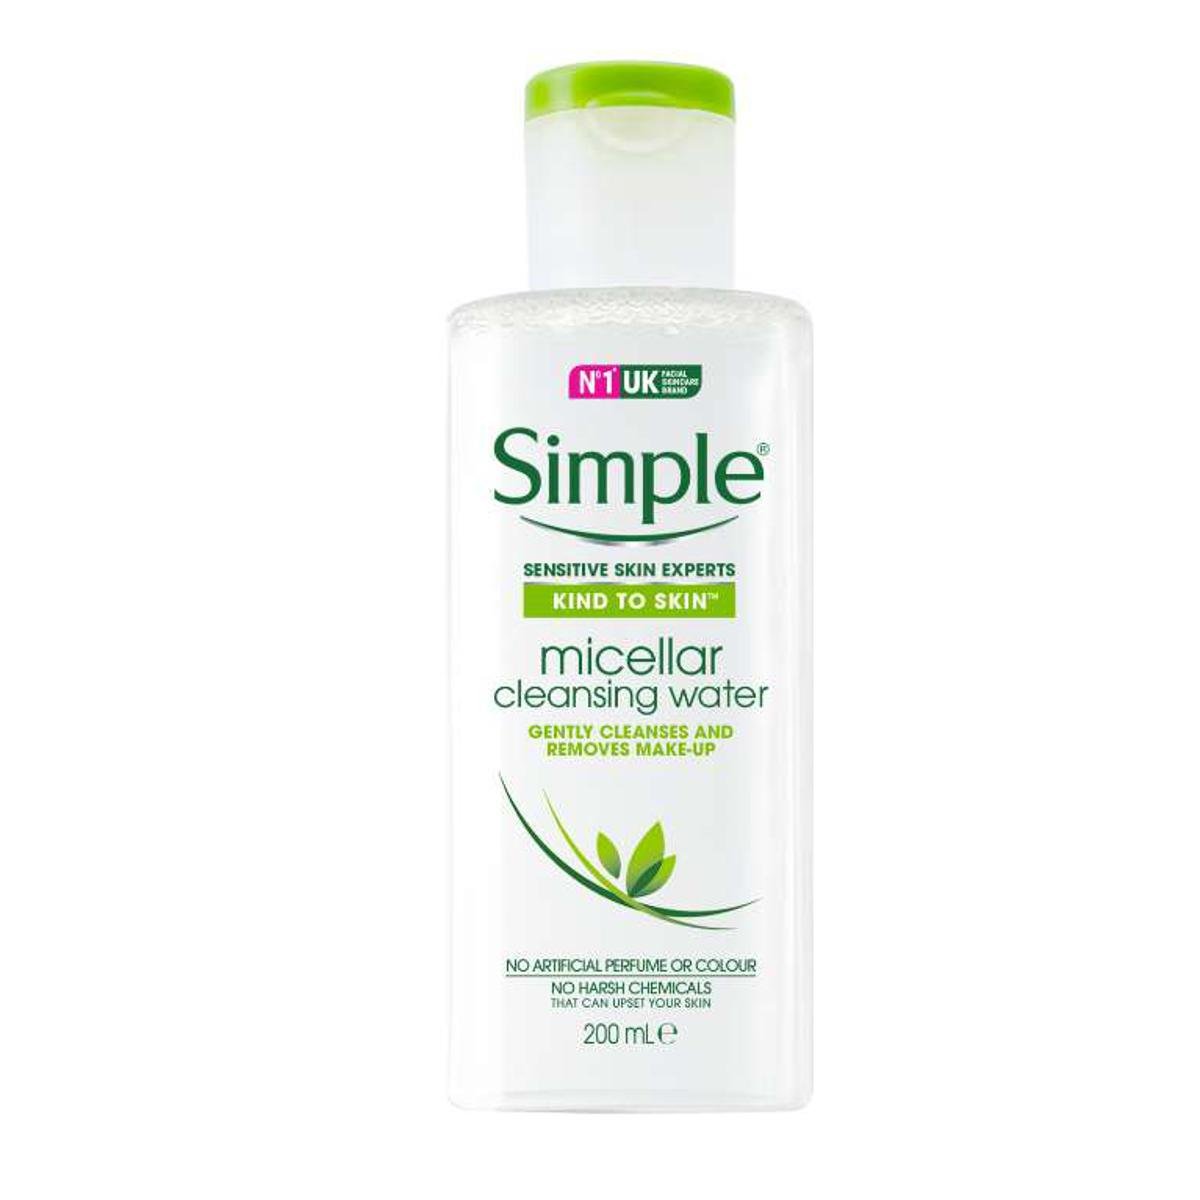 Simple Micellar Cleansing Water Hydrates and Gently Removes Make-Up - 200ml